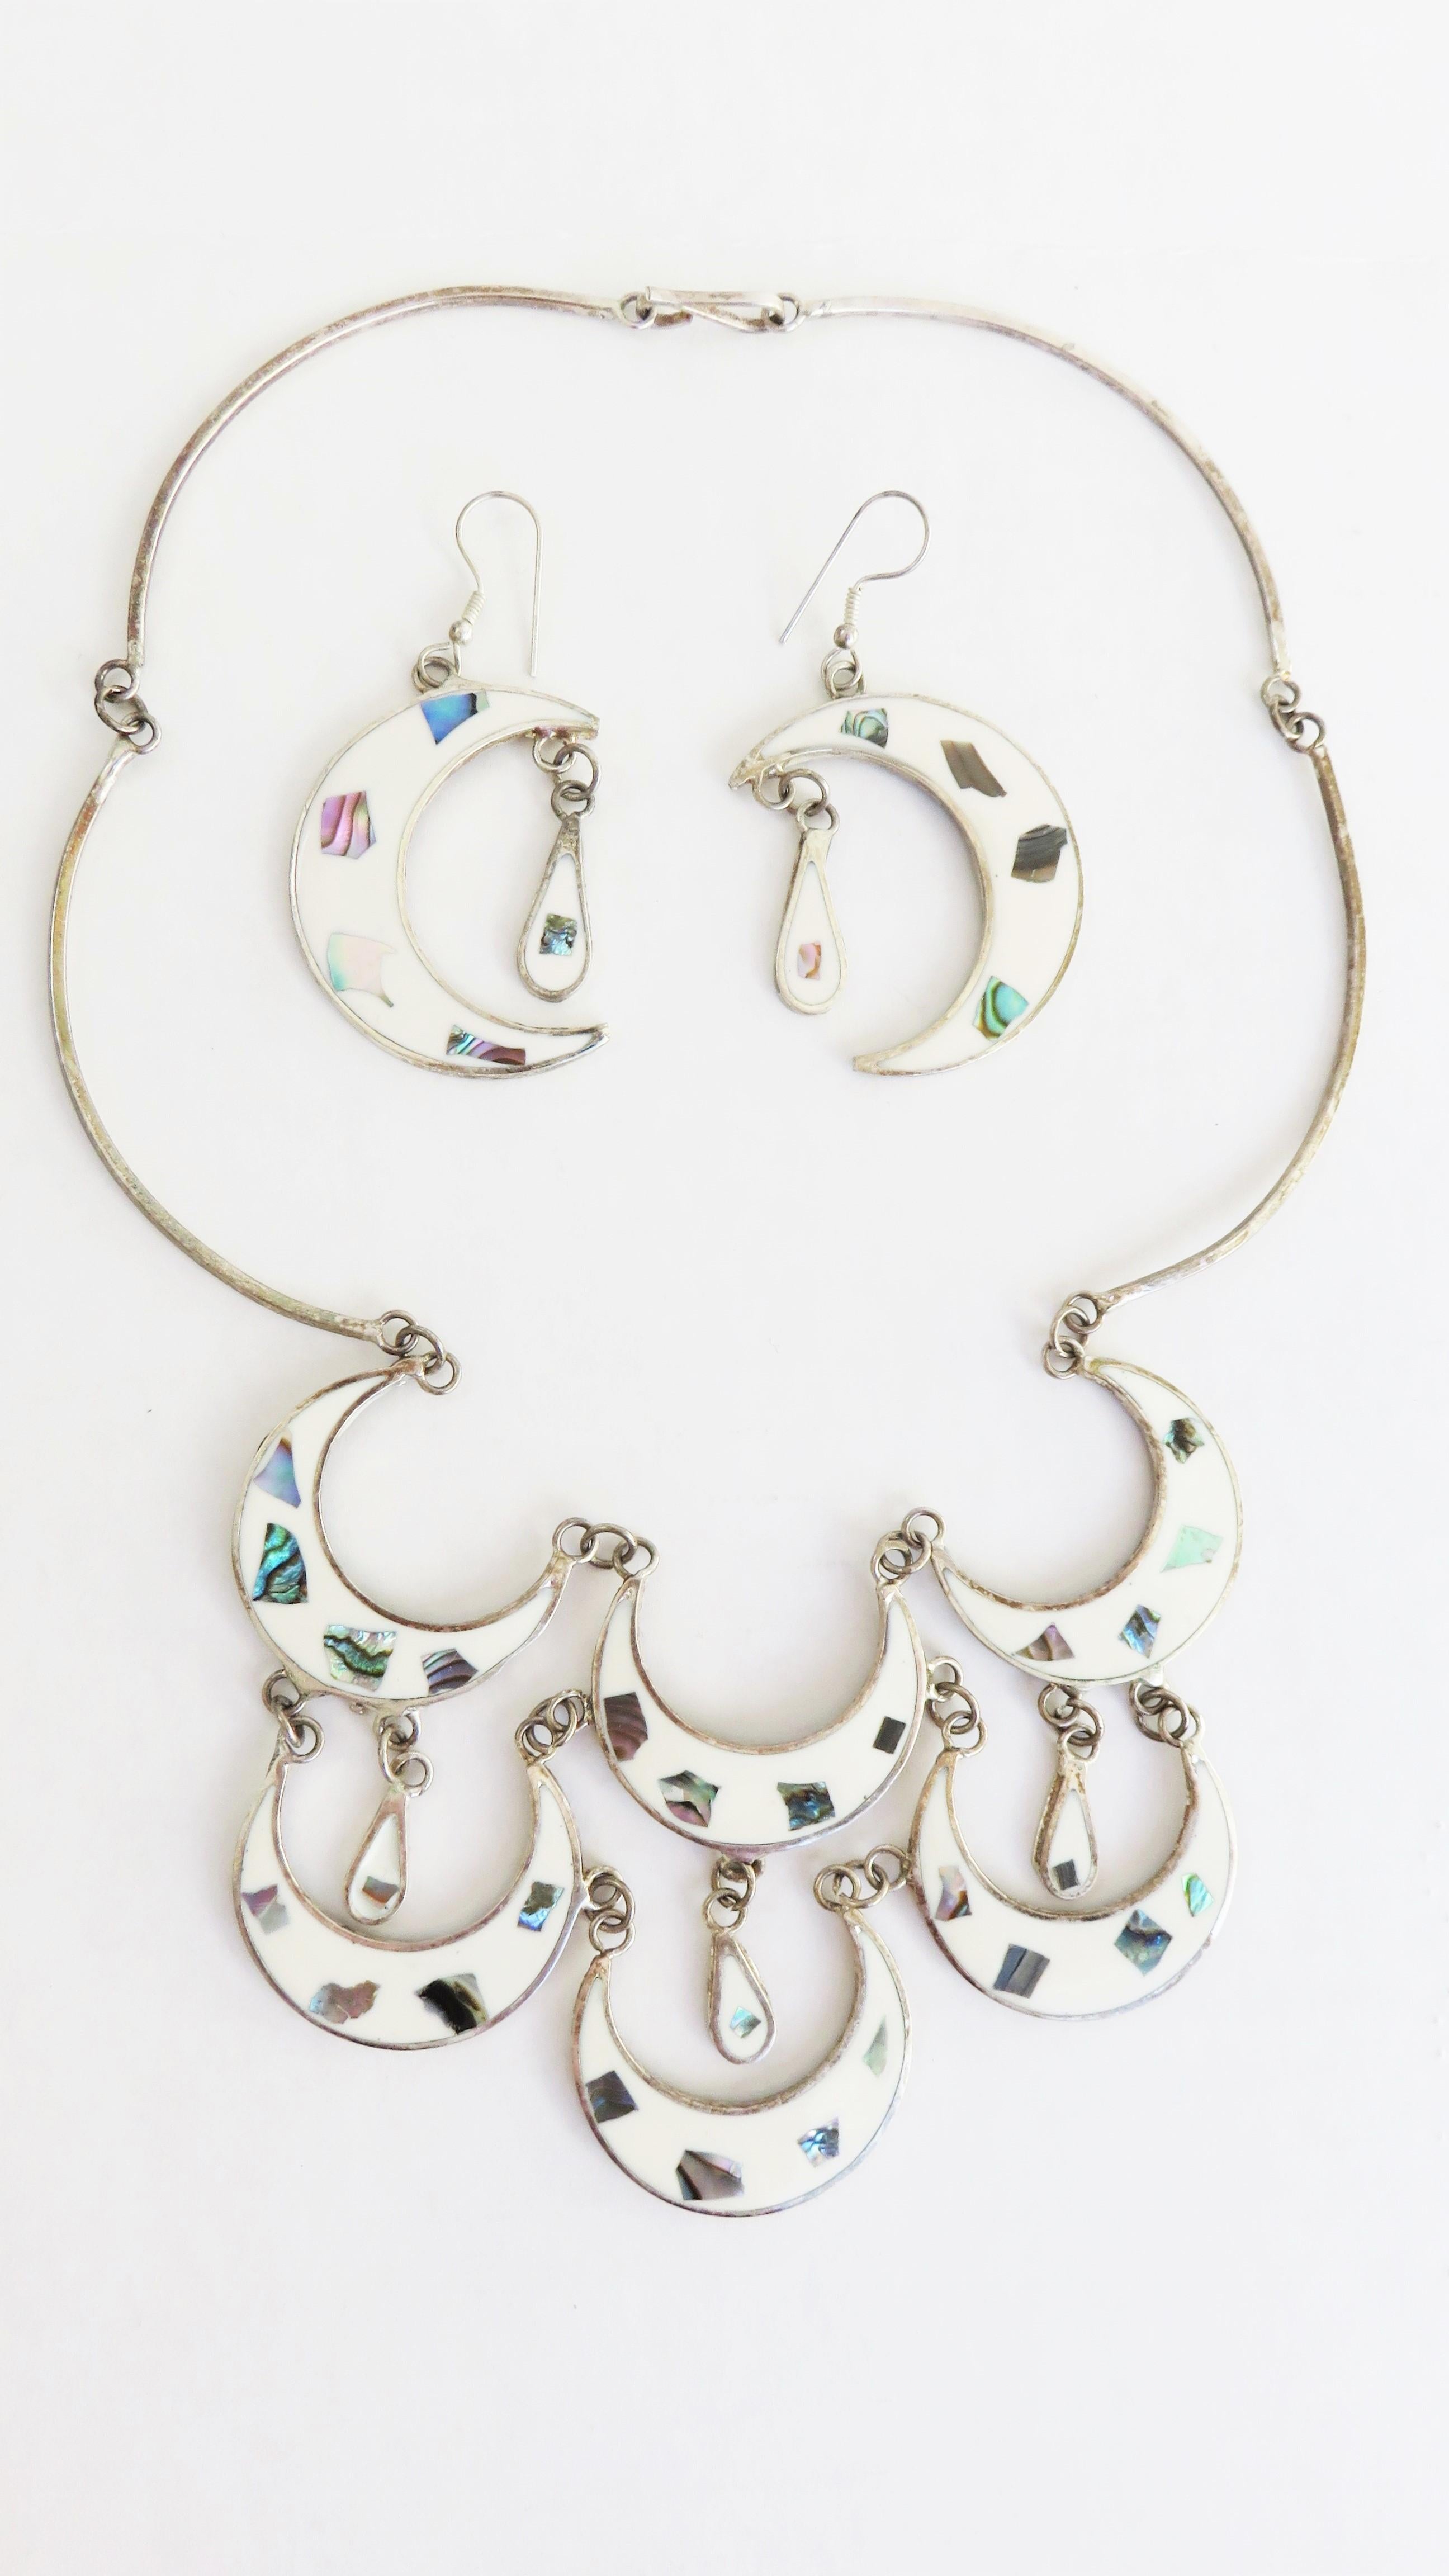 A very pretty necklace and earring set with inlaid abalone in white enamel.  There are 6 white enamel abalone inlaid crescents and 3 tear drops comprising the front bib of the necklace connected by bar links with a back hook closure.

Necklace